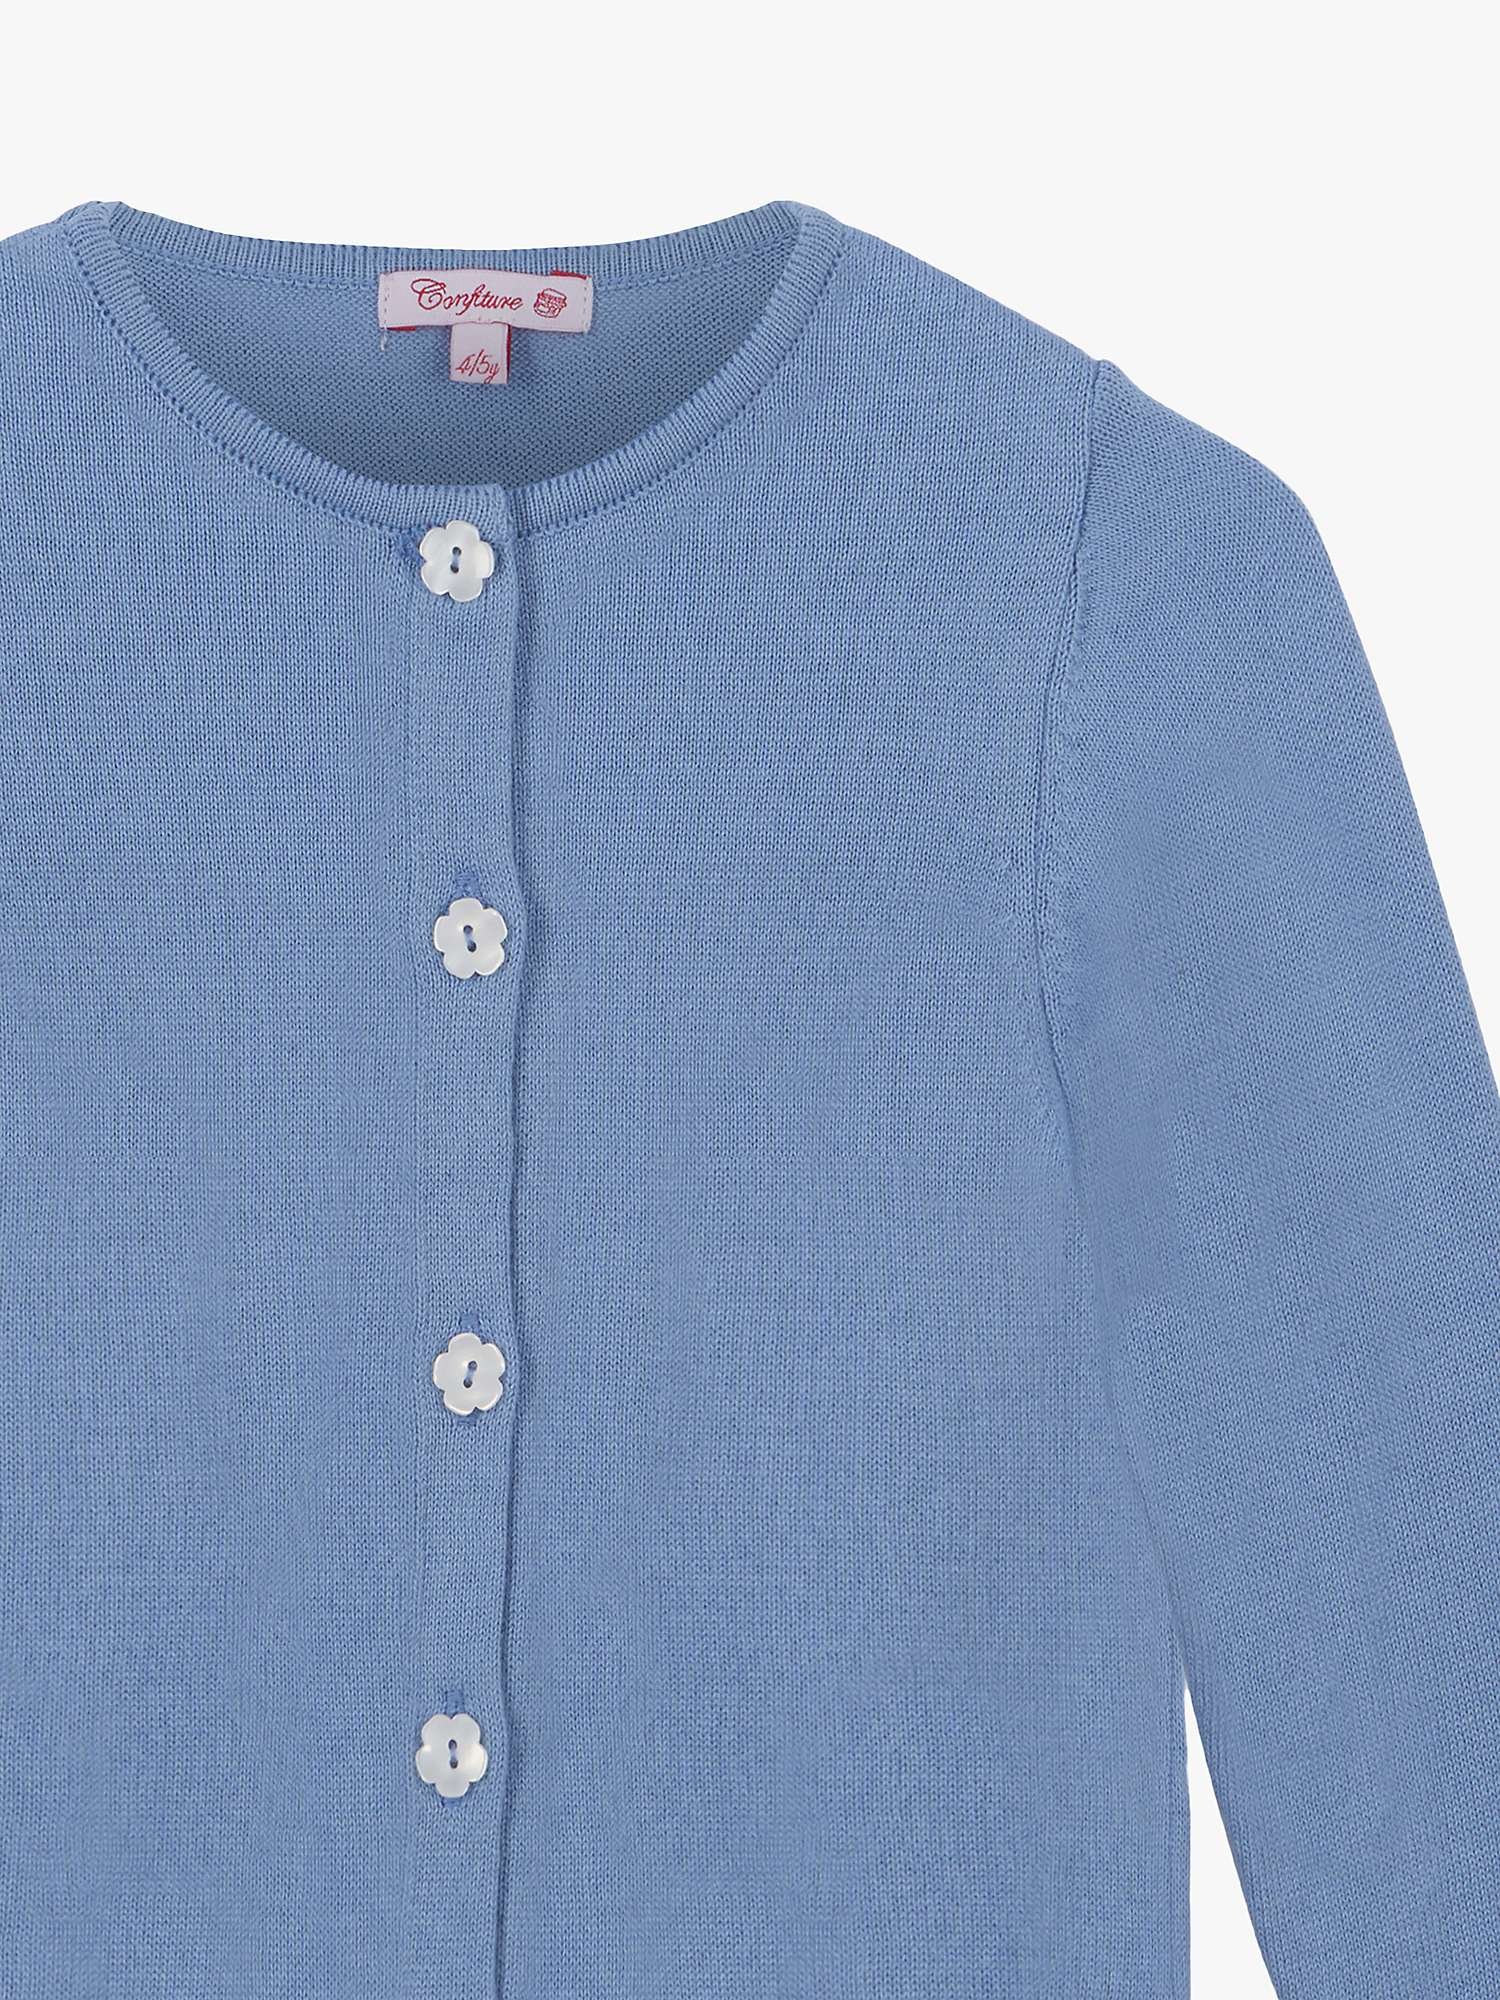 Buy Trotters Kids' Pretty Button Cardigan Online at johnlewis.com